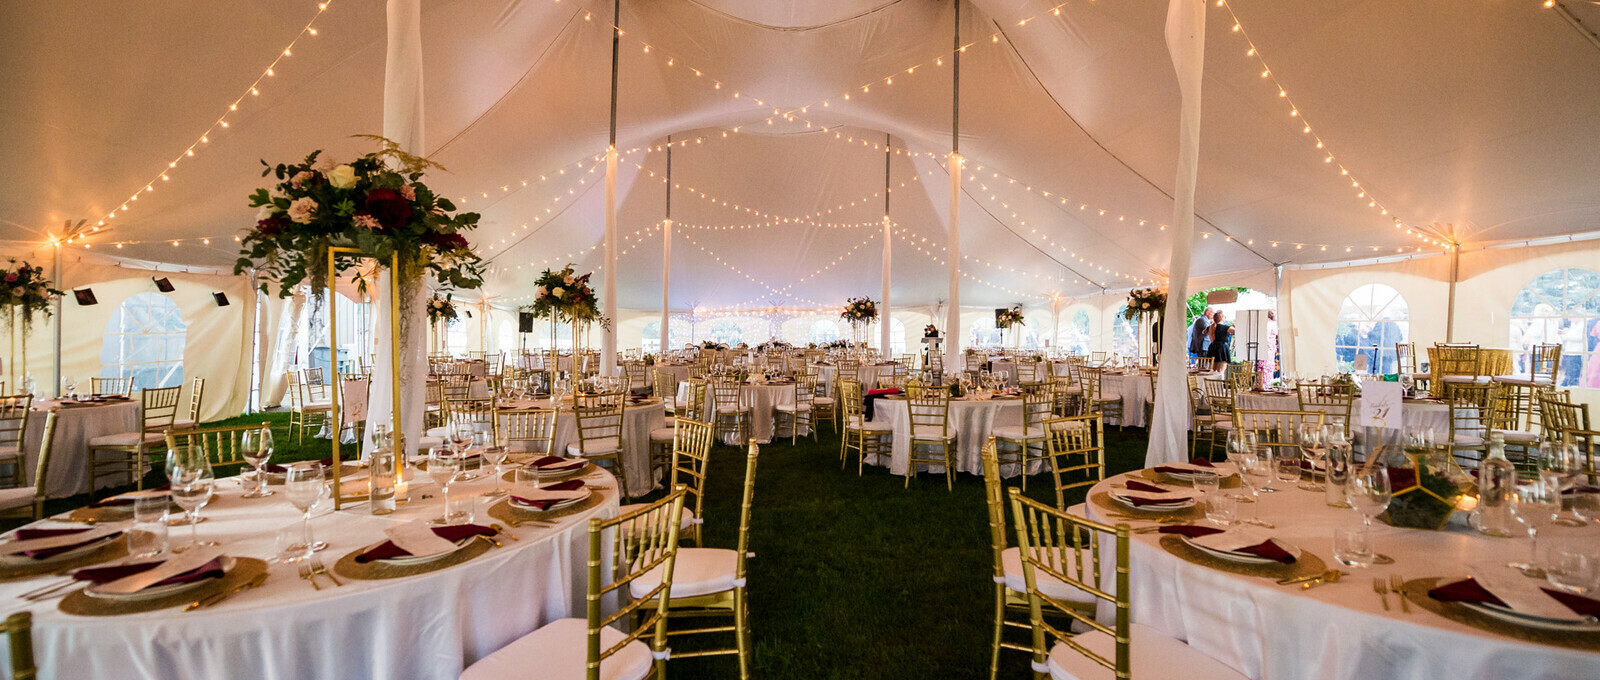 Special Event Rentals - Red Deer showcases an event reception with round tables, walnut folding chairs, and dance floor under a big pole tent